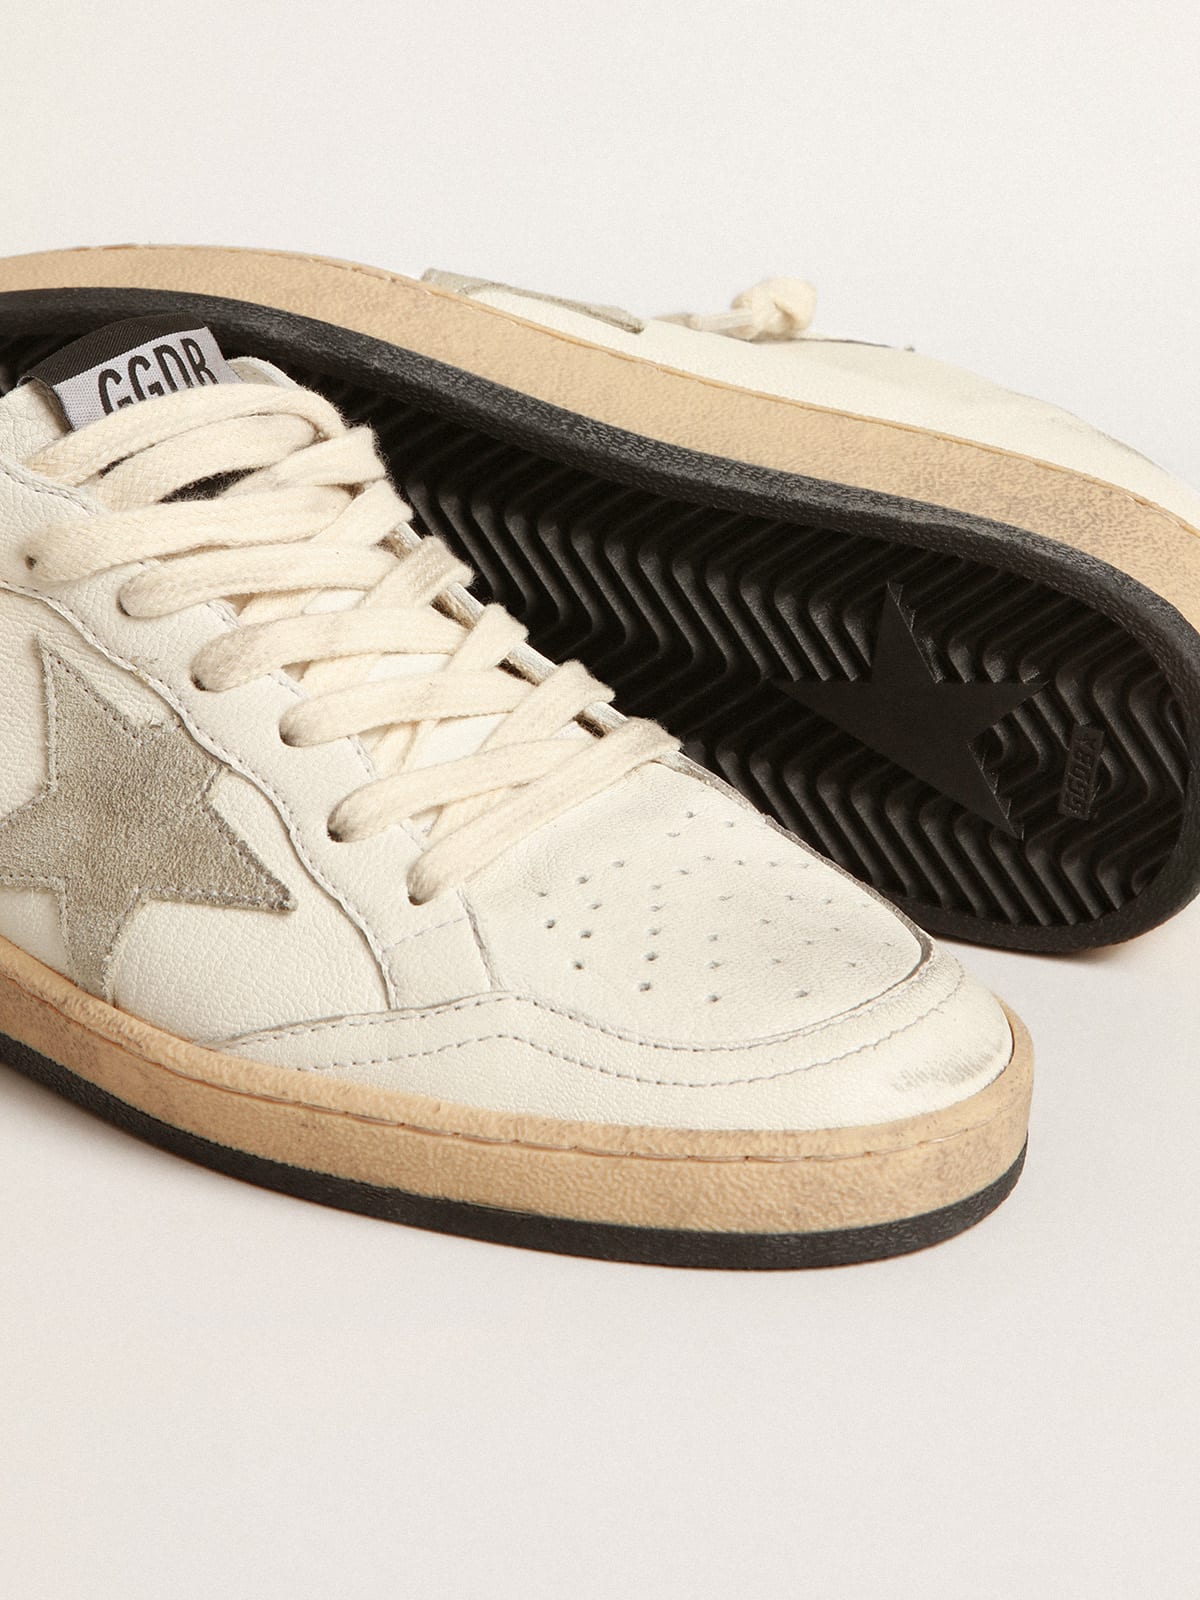 Golden Goose - Ball Star Sabots in nappa leather with ice-gray suede star in 